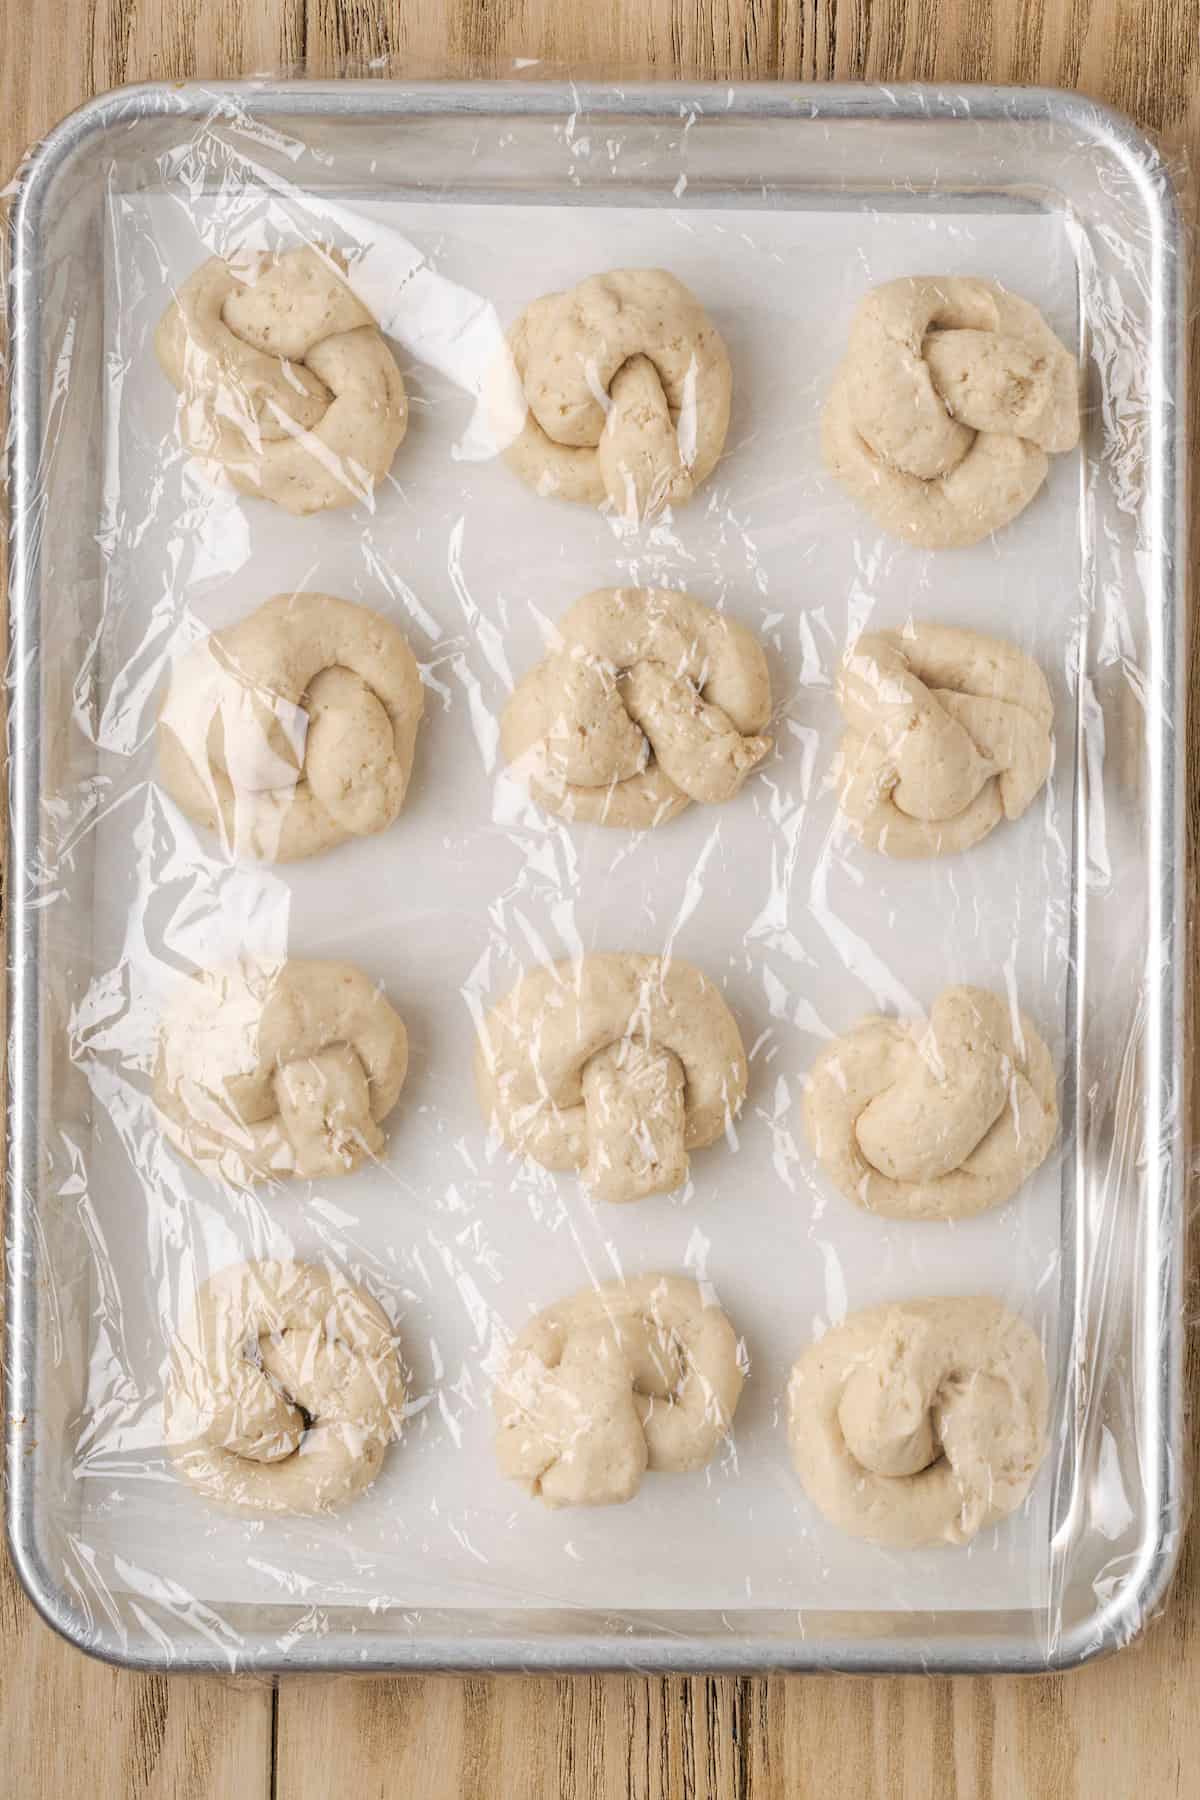 Unbaked gluten-free garlic knots on a lined baking sheet covered in plastic wrap.